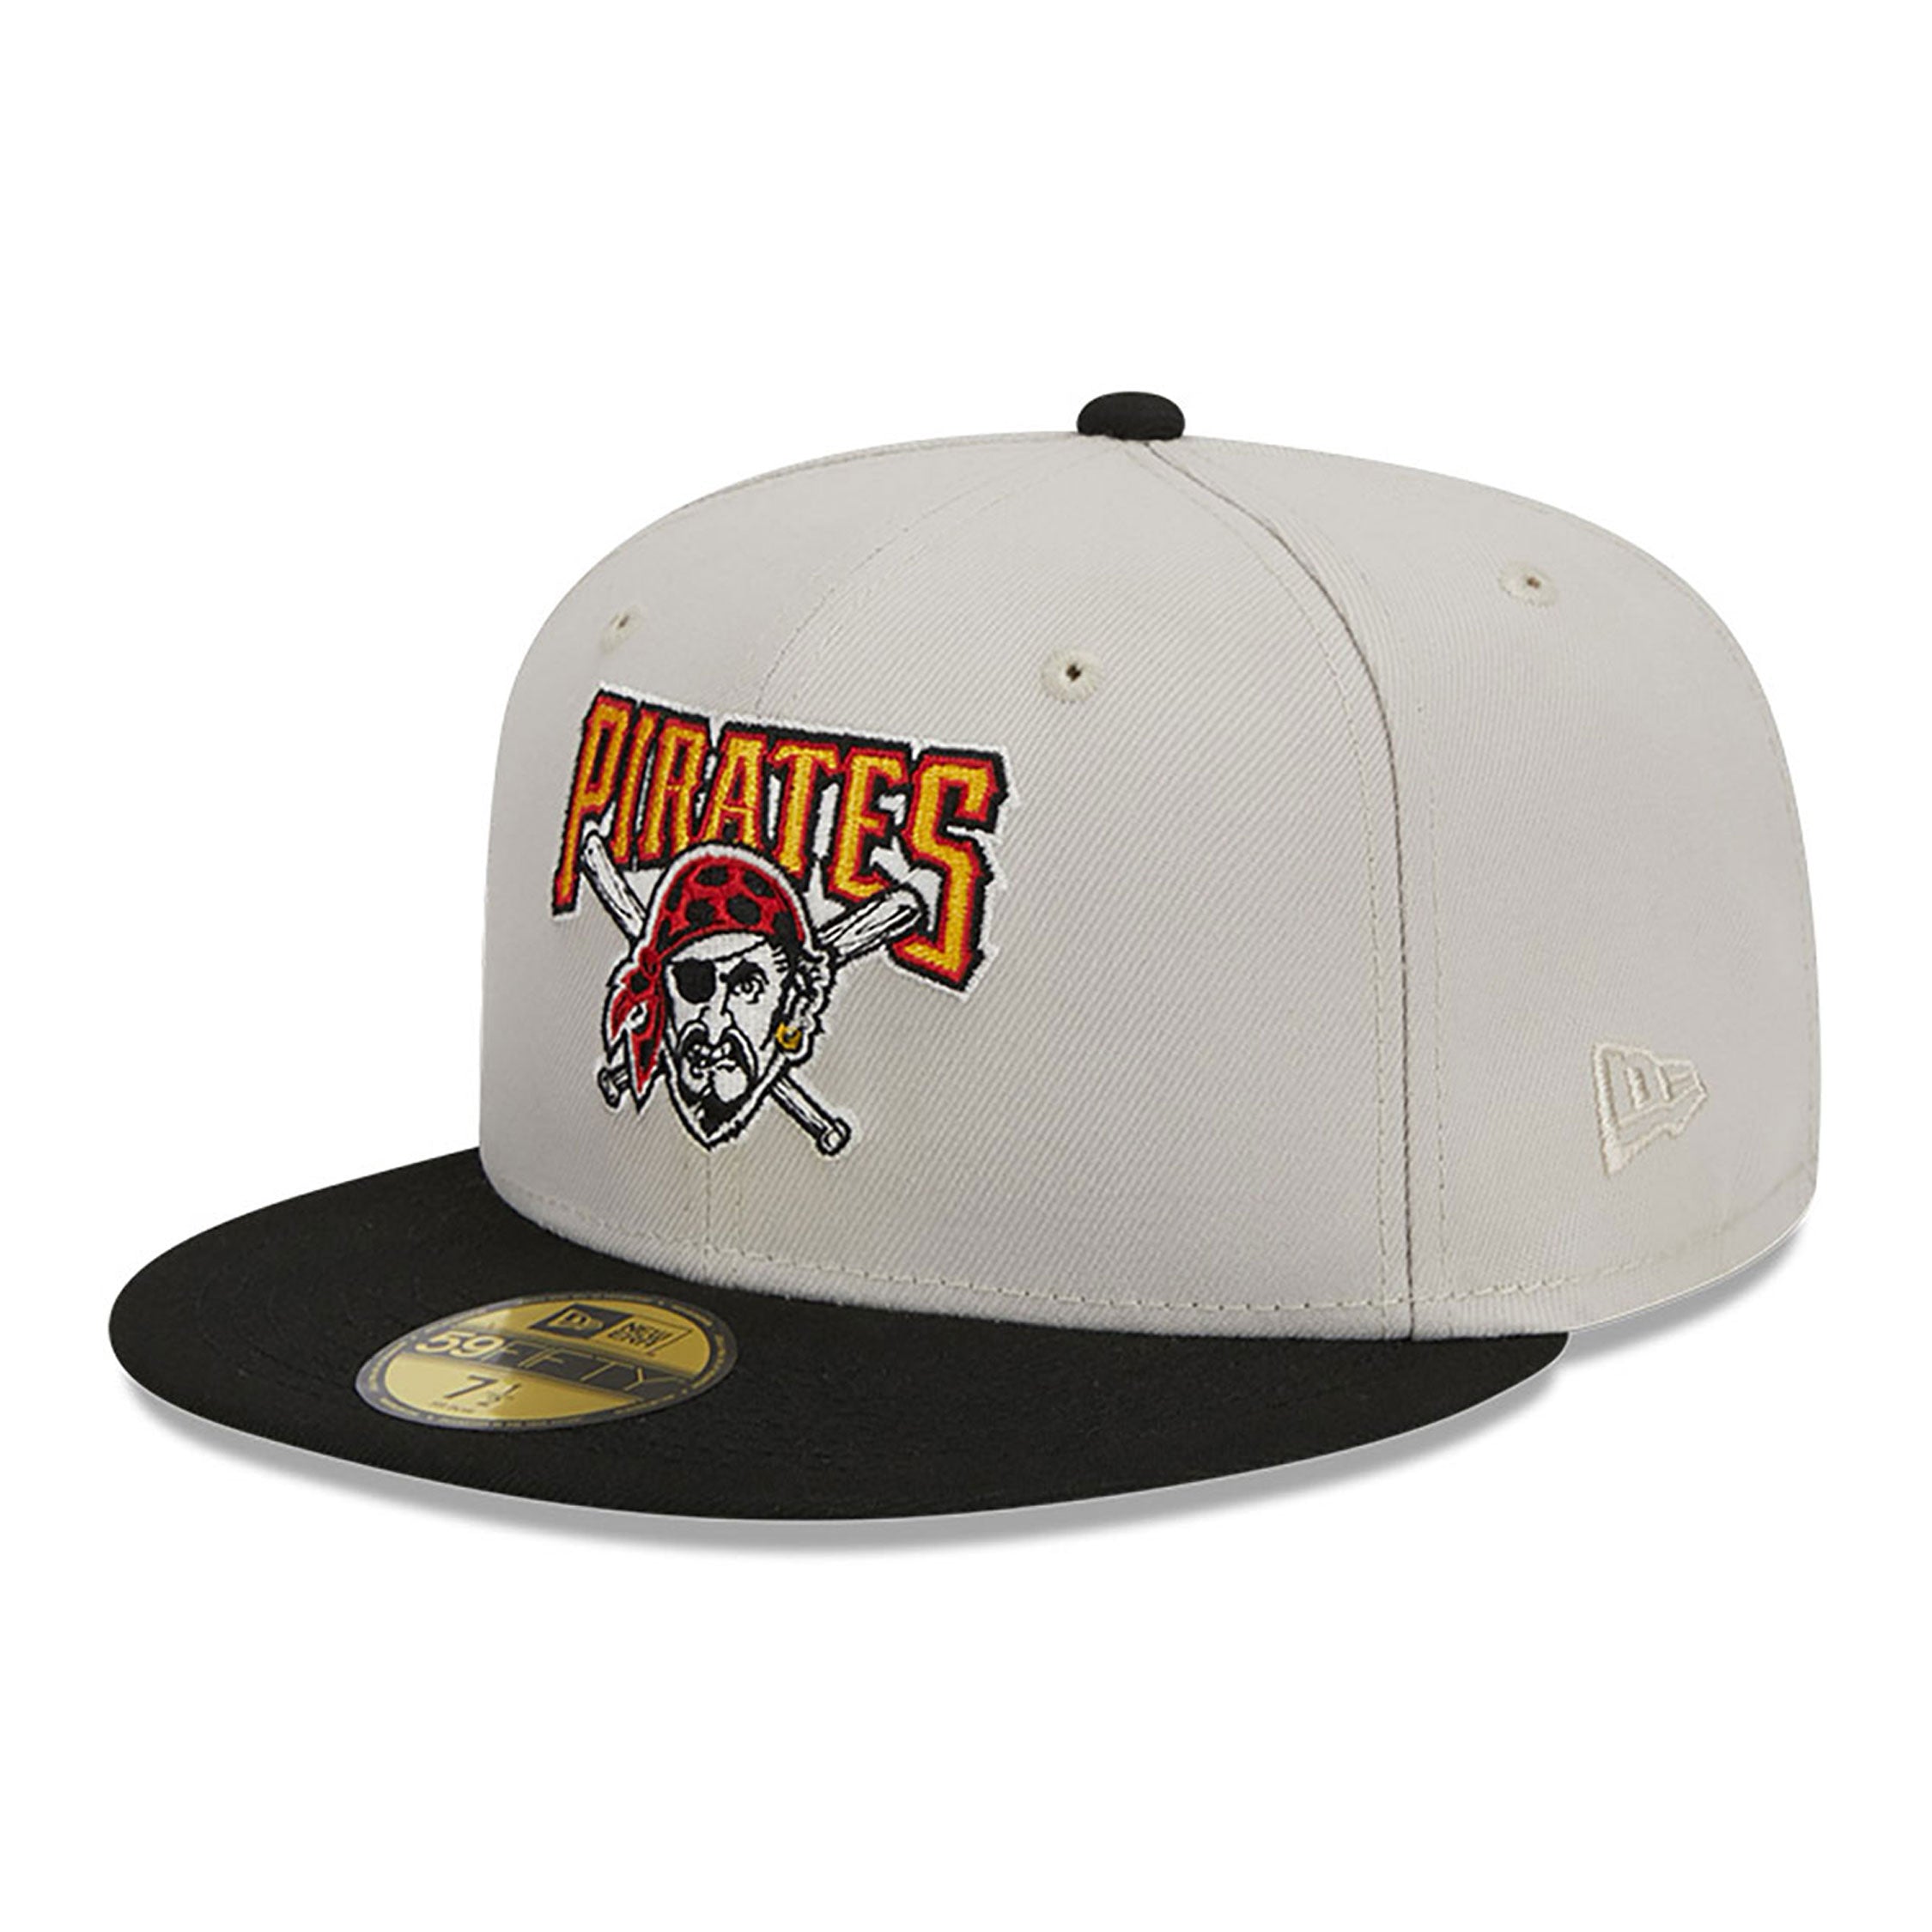 Men's New Era Stone/Gold Pittsburgh Pirates Retro 59FIFTY Fitted Hat